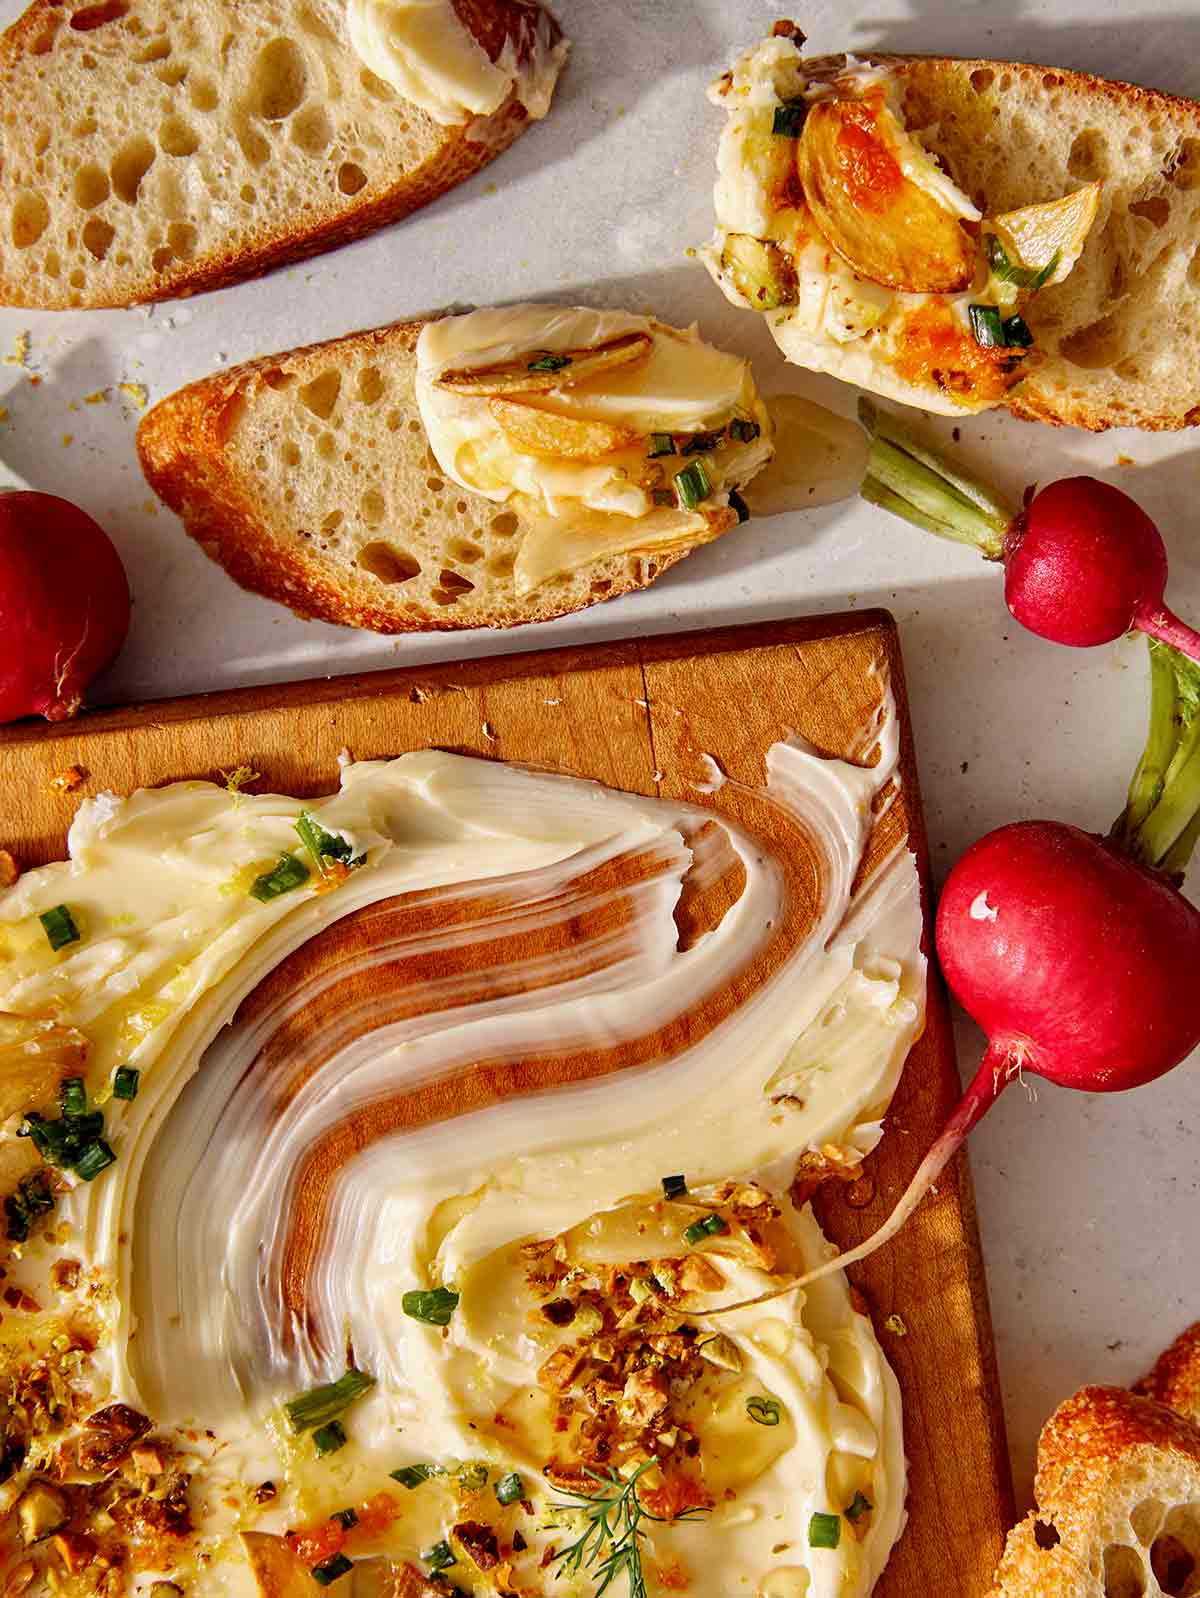 Butter board recipe with bread dipped in it. 